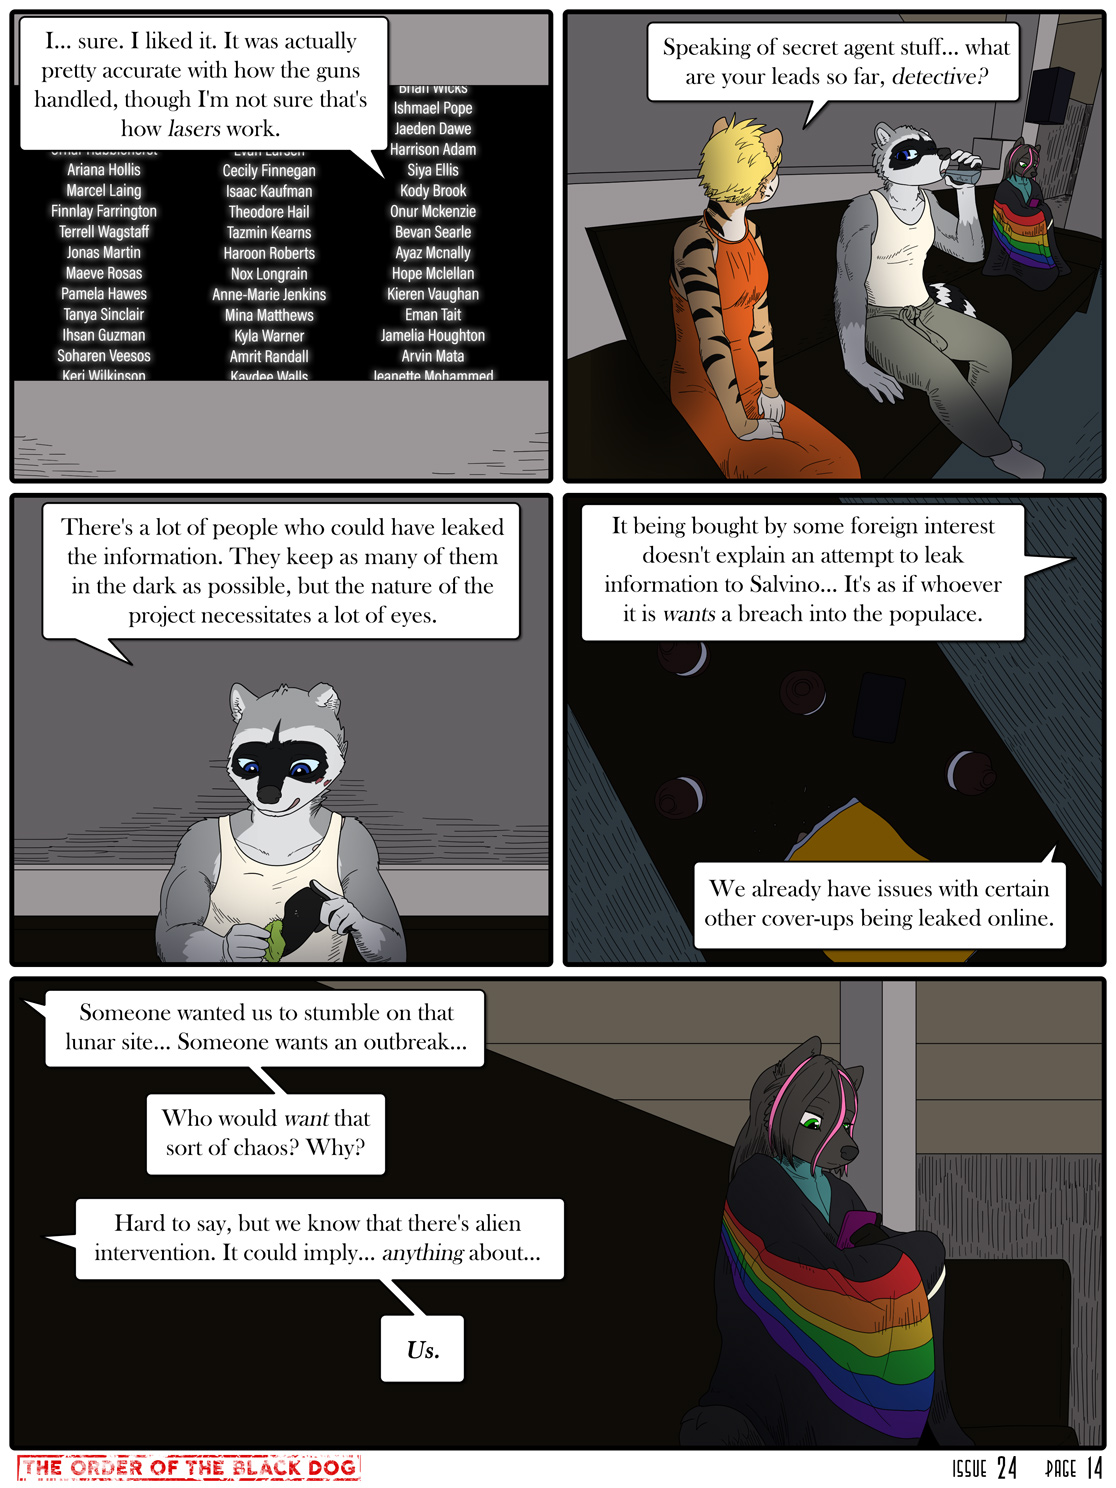 Issue 24, Page 14